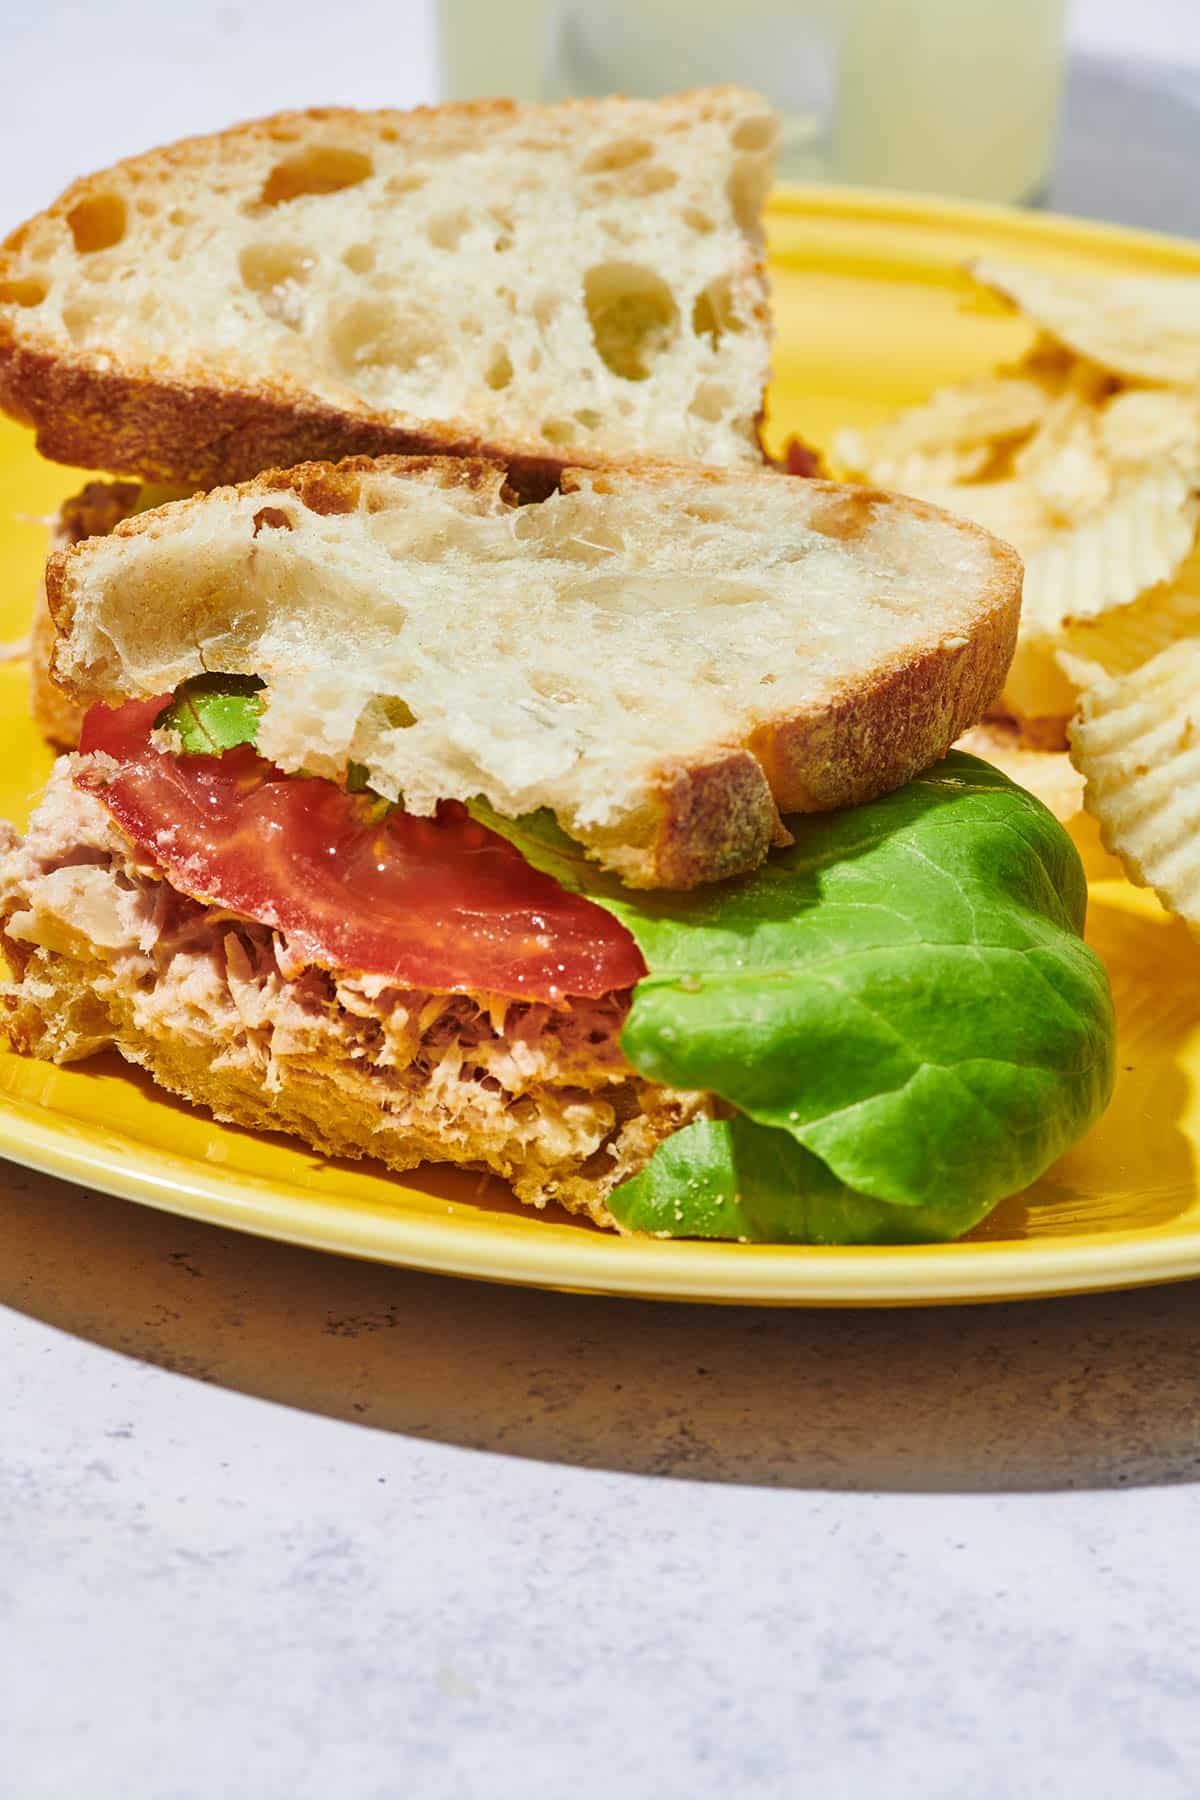 Tuna fish sandwich with tomato and lettuce on yellow plate with chips.